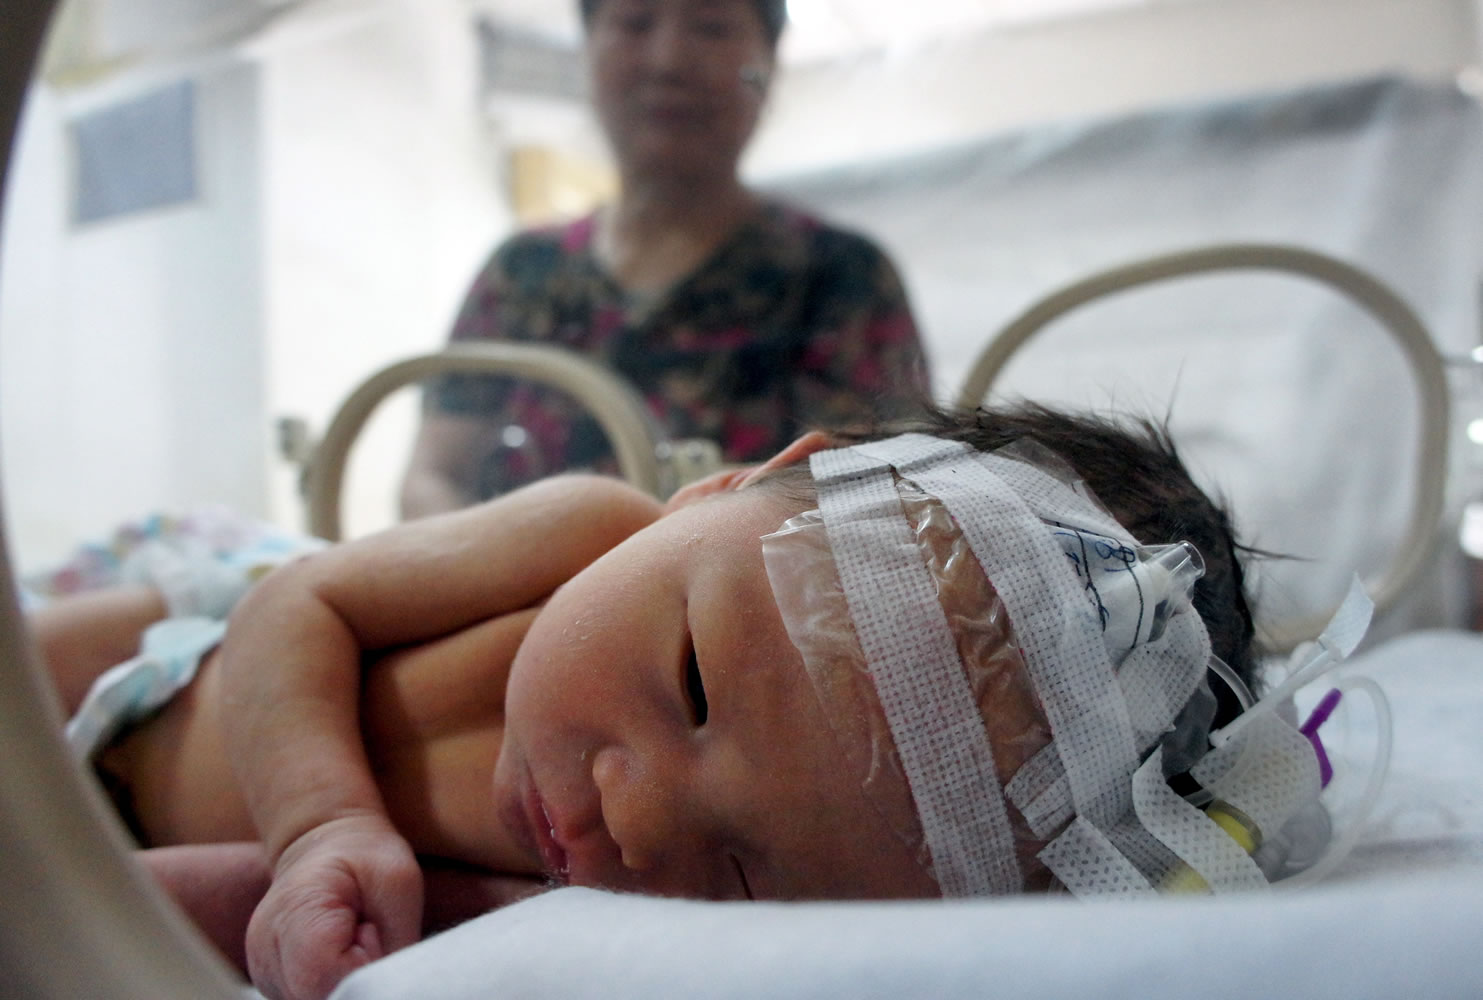 The baby who was rescued from a sewage pipe lies in an incubator Tuesday at a hospital in China's Zhejiang province.